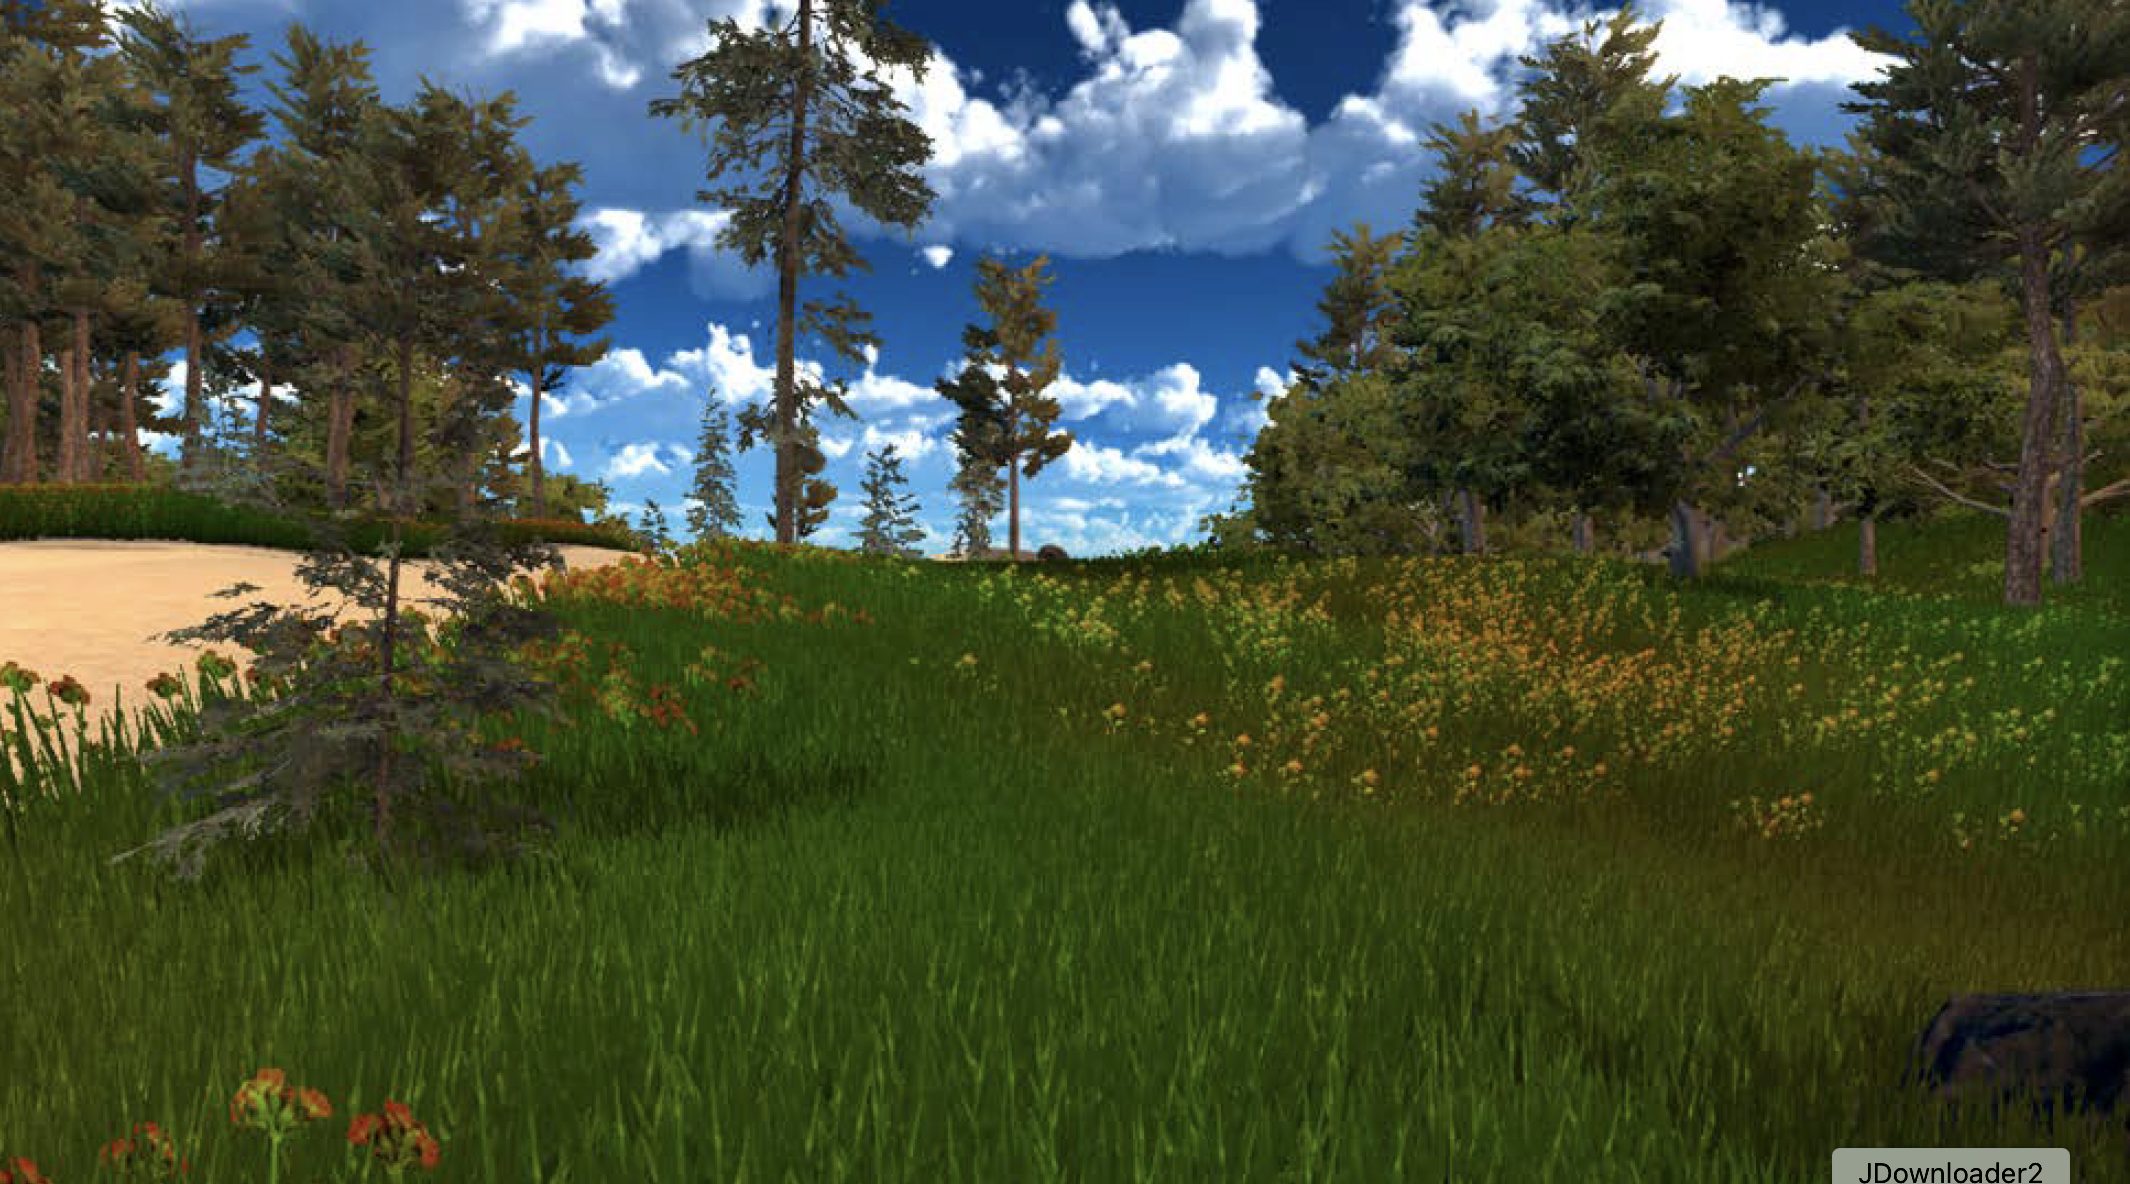 The forest model developed in Unity.